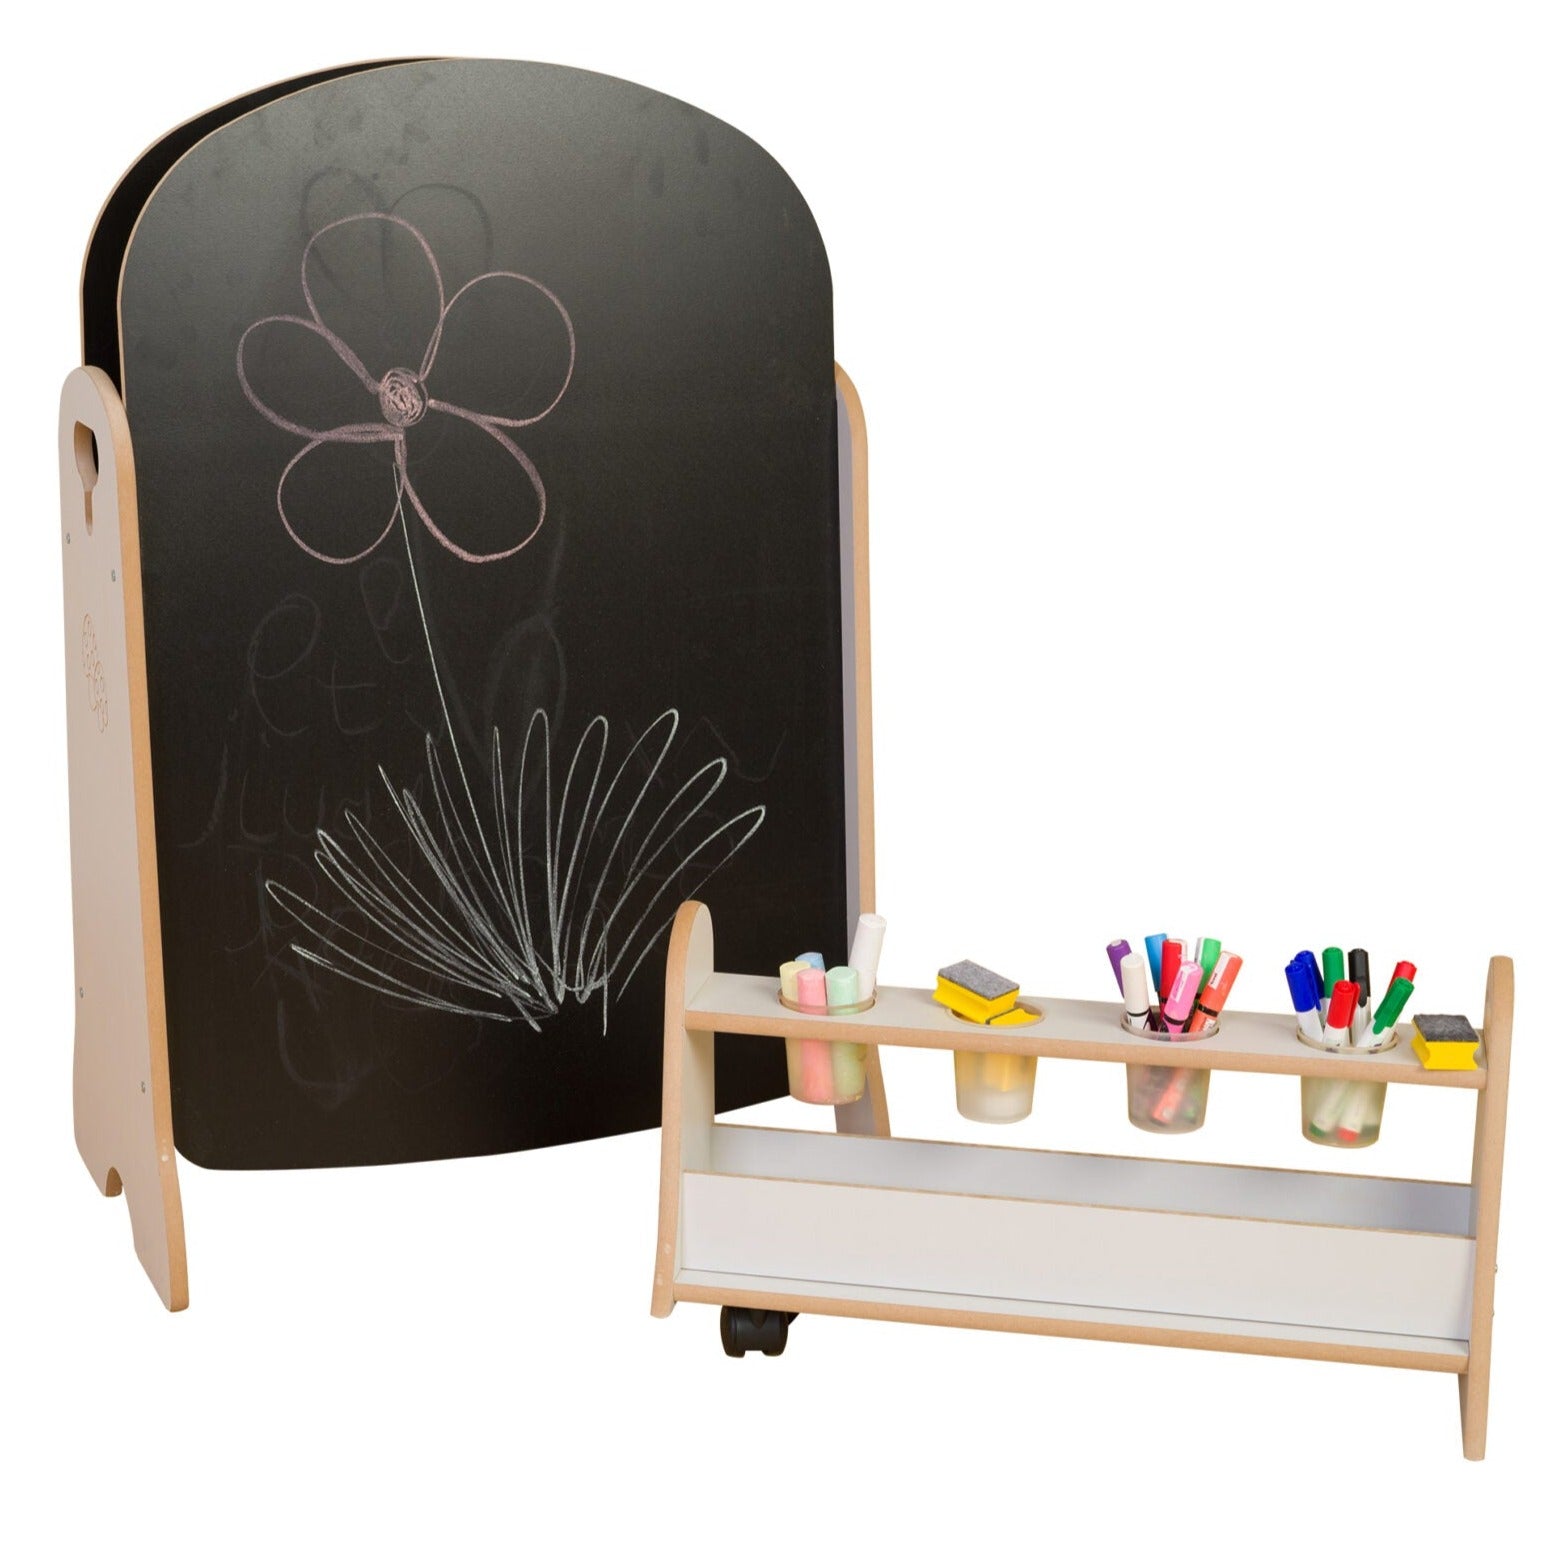 Tall Easel and Storage Trolley, A tall easel with wide base for stability, featuring reversible chalkboard and blackboard sides. The Tall Easel and Storage Trolley includes a pull out storage unit fitted with two locking castors and hand holes for easy maneuvering. Encourages independent play and creativity. 15mm Covered MDF – ISO 22196 certified antibacterial. Stow away storage trolley is fitted with 2 locking castors. Reversible blackboard and drywipe panels to encourage creativity. Supplied in flat pack 